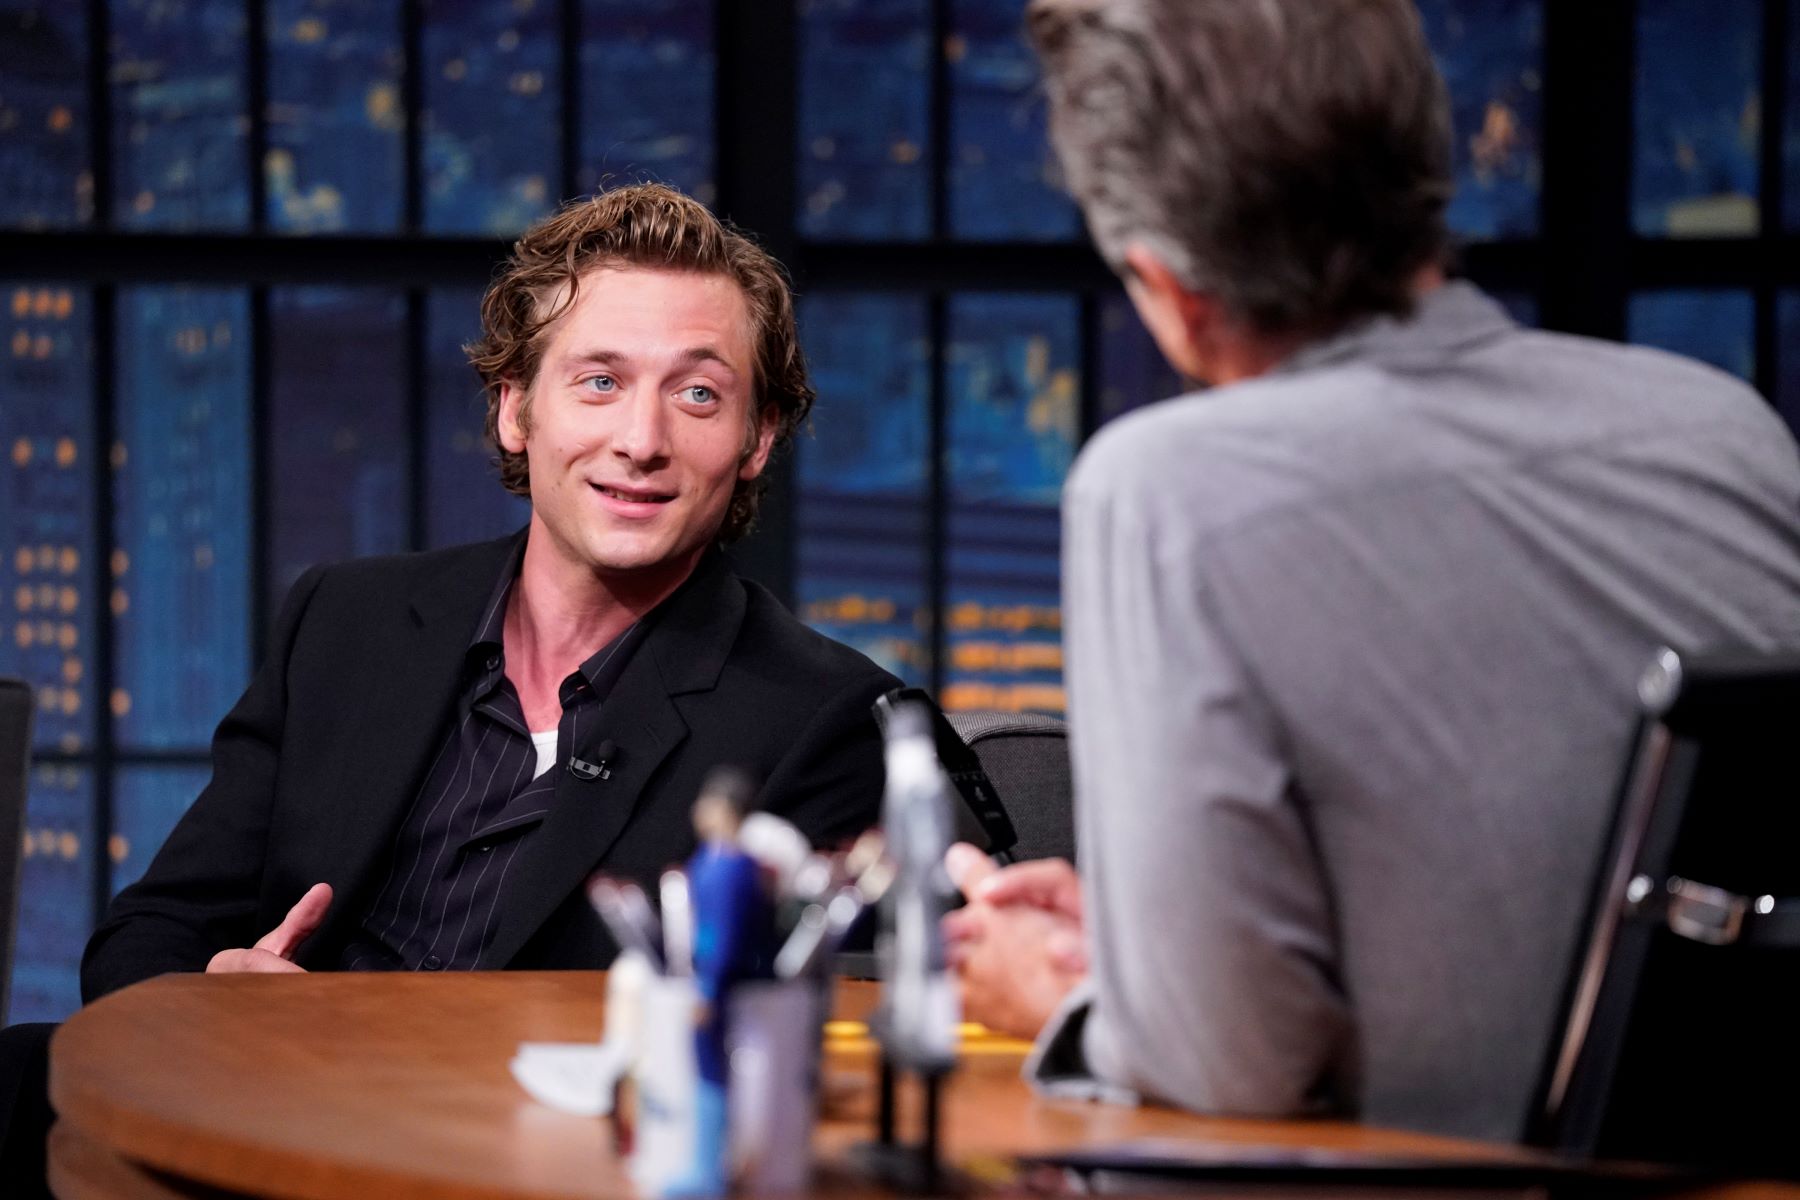 Jeremy Allen White on 'Late Night with Seth Myers' promoting 'The Bear'